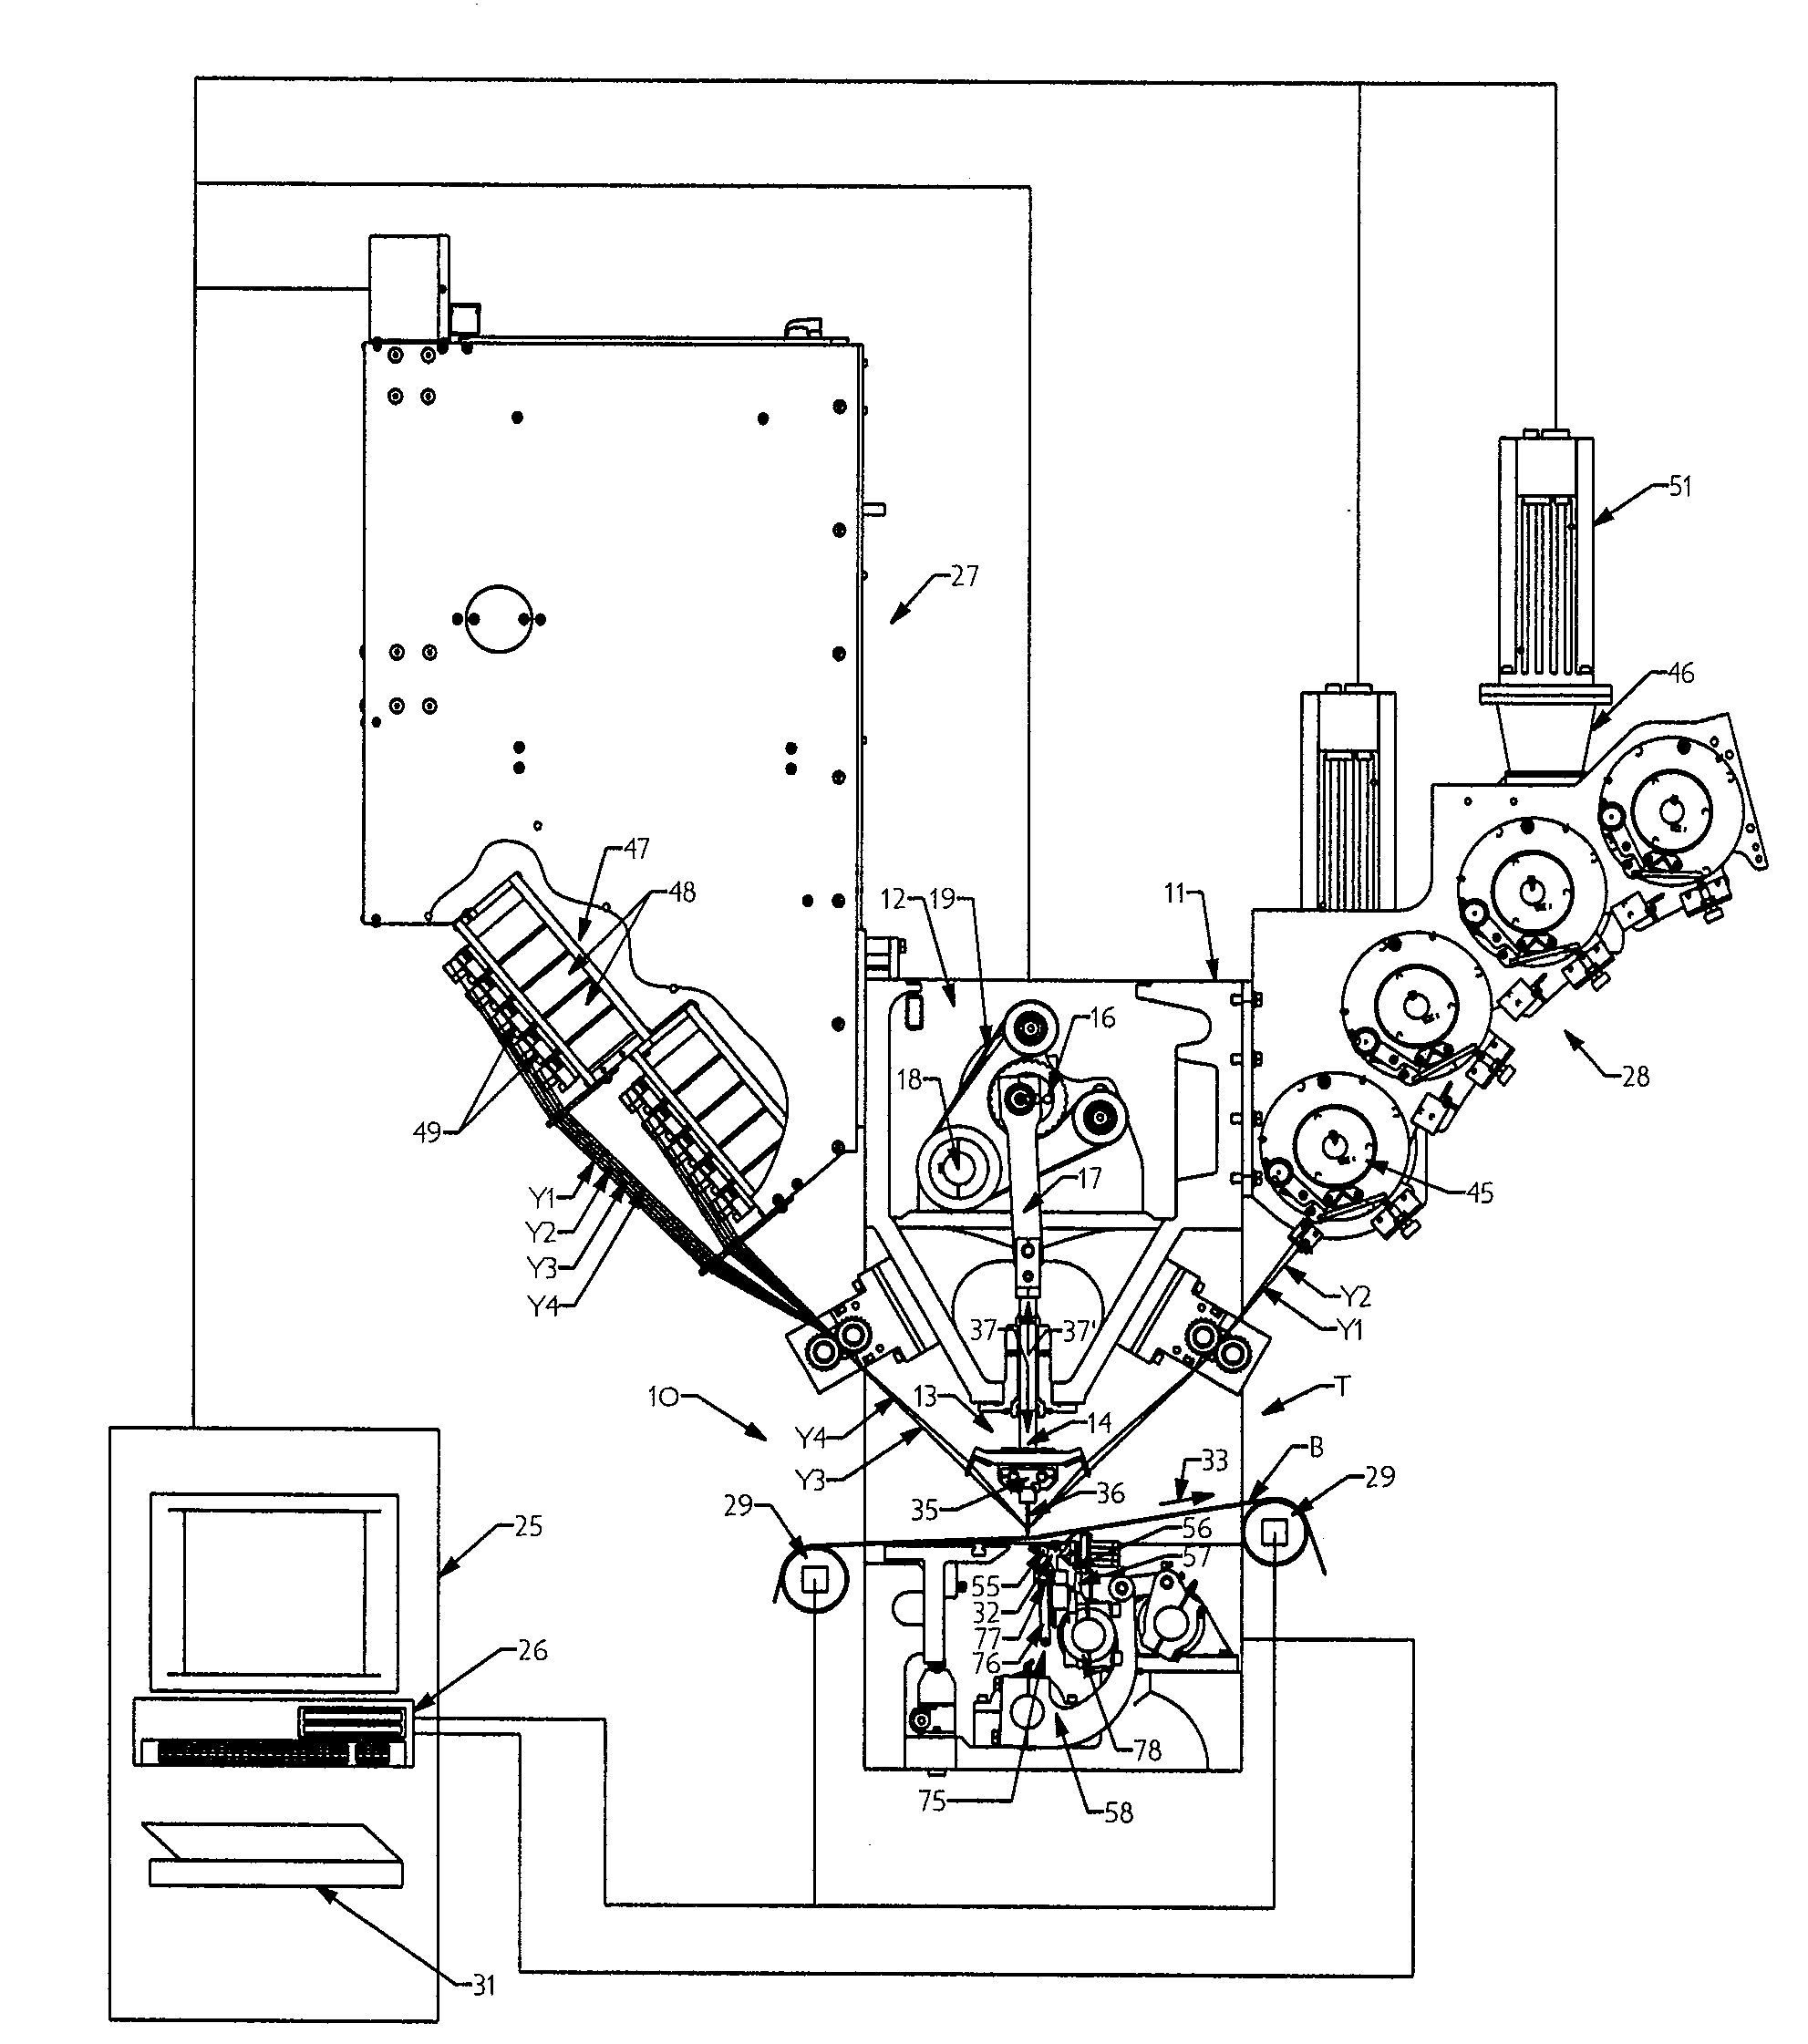 Stitch distribution control system for tufting machines